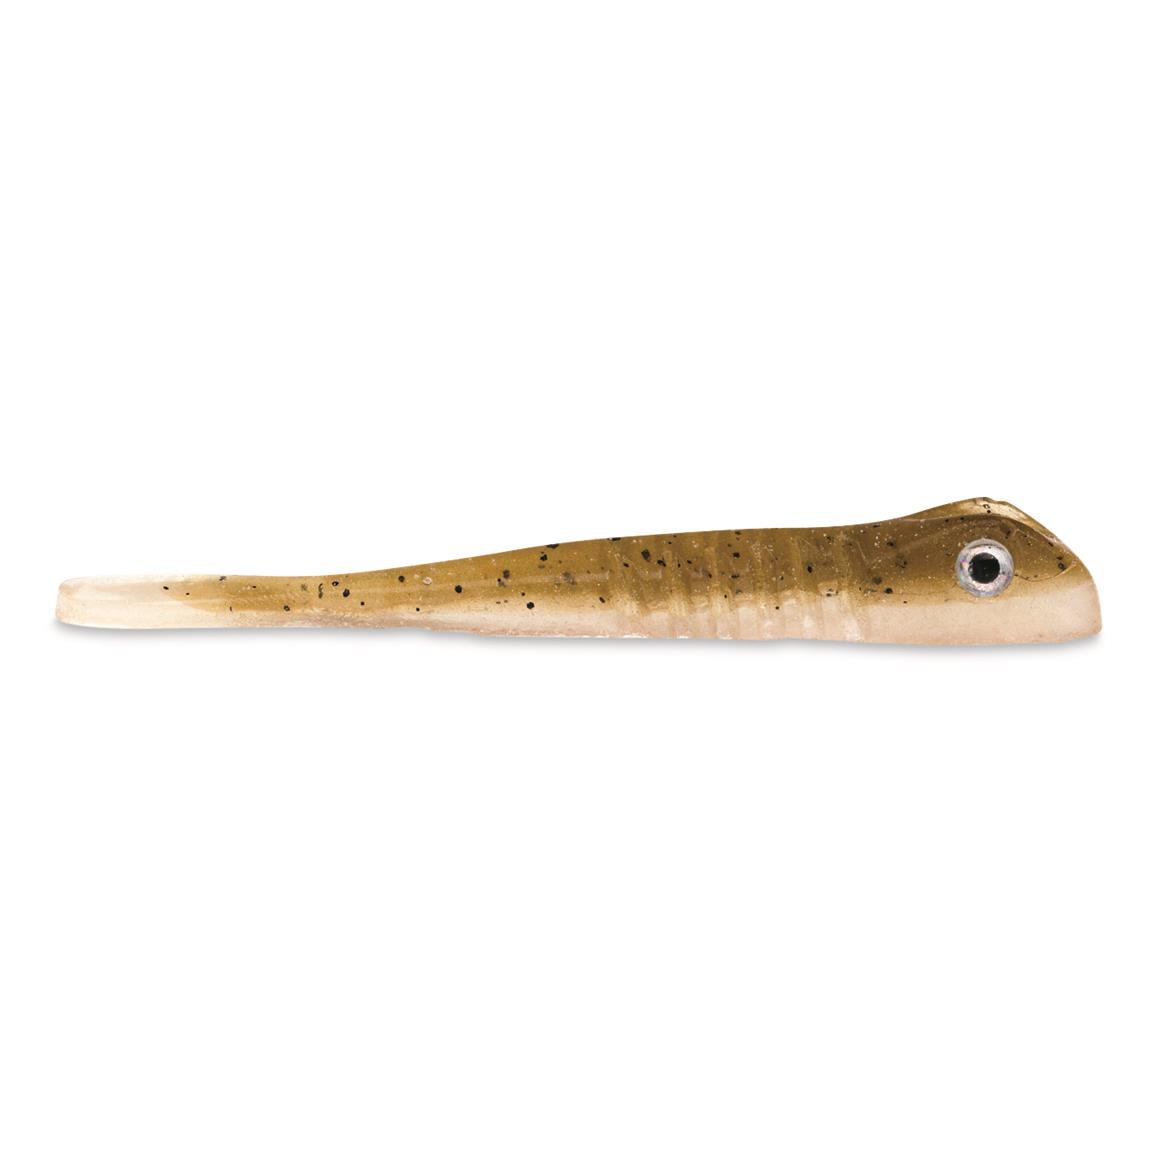 NetBait BaitFuel Infused Drifter Minnow Soft Baits, 2.75", 6 Pack, Juvenile Goby